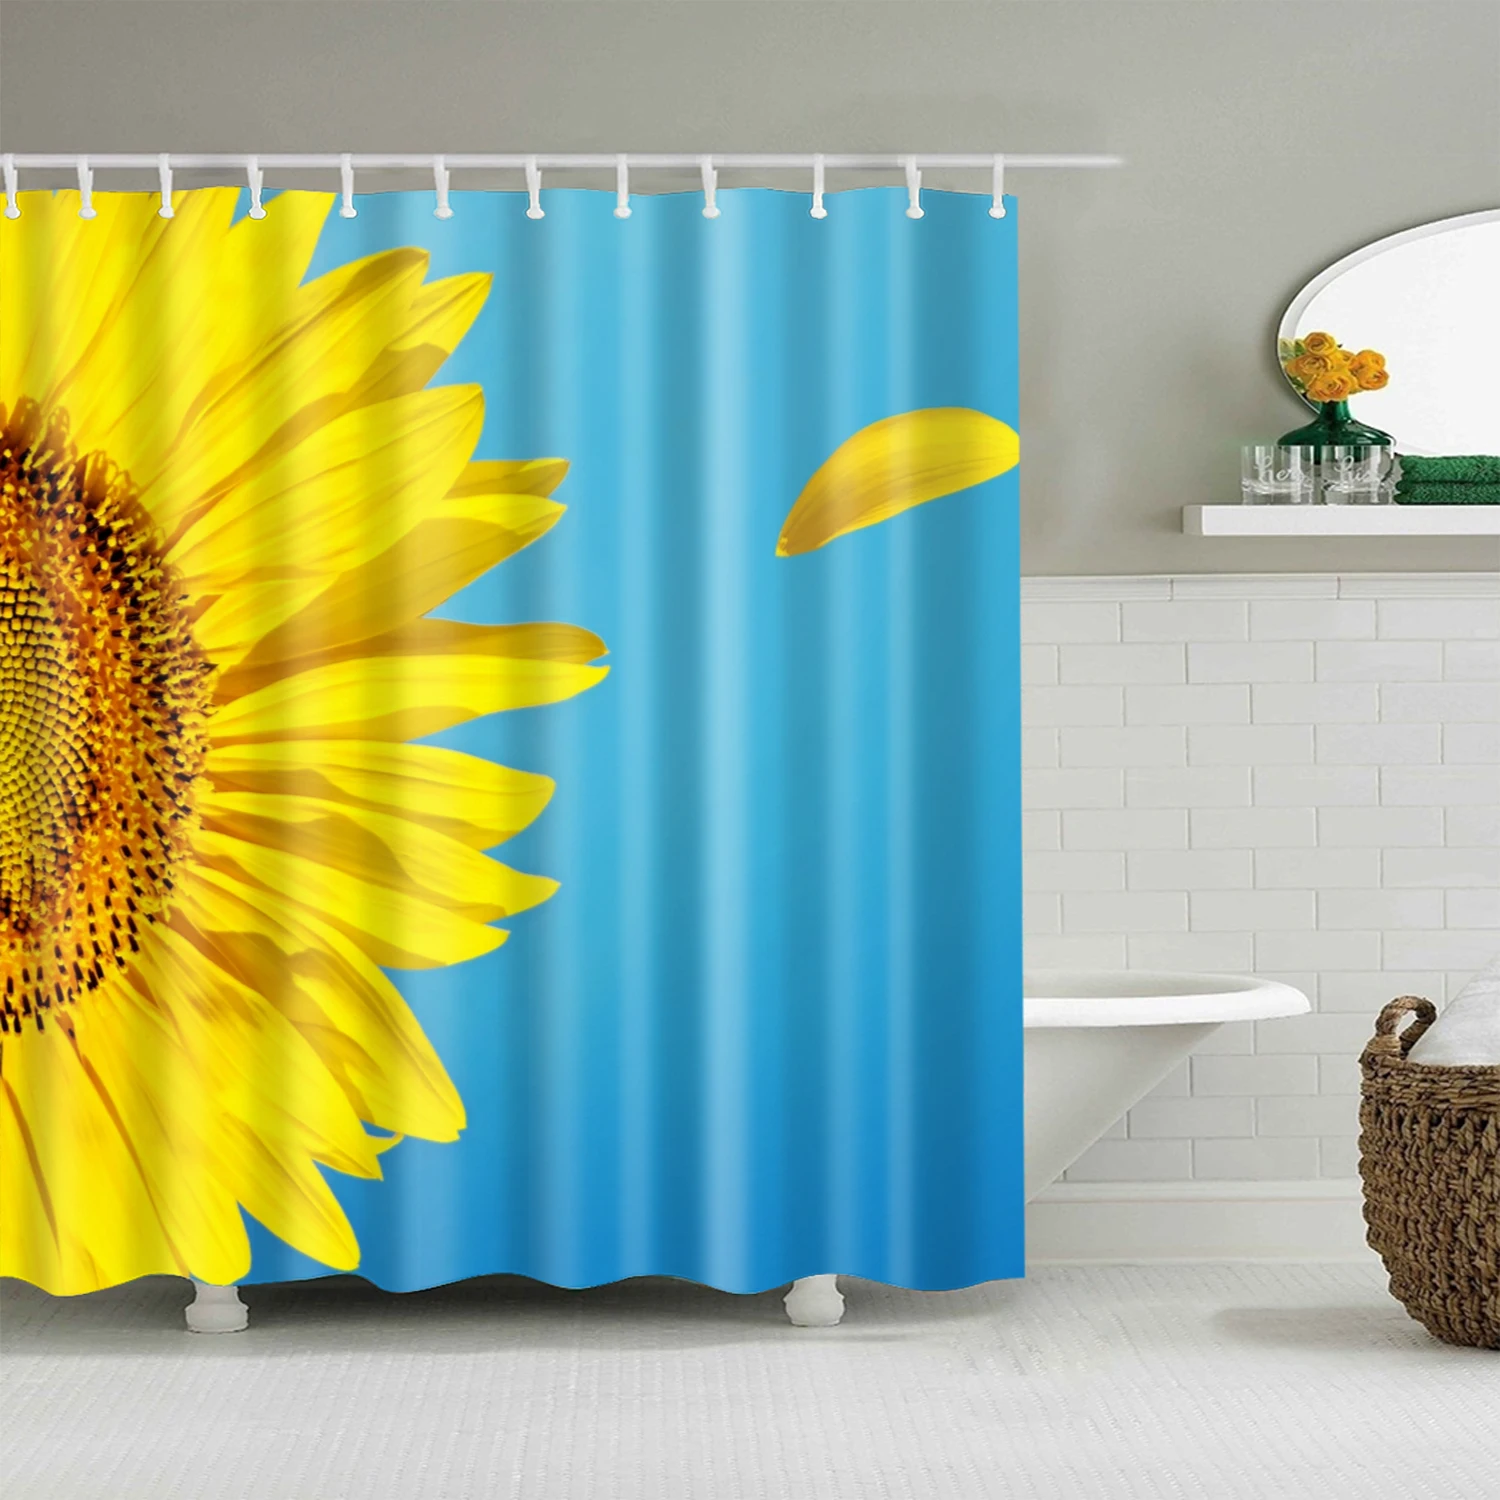 Waterproof washable shower curtains sunflower Print curtain for Bathroom polyester 180x200cm 3D Blackout shower curtain cortina